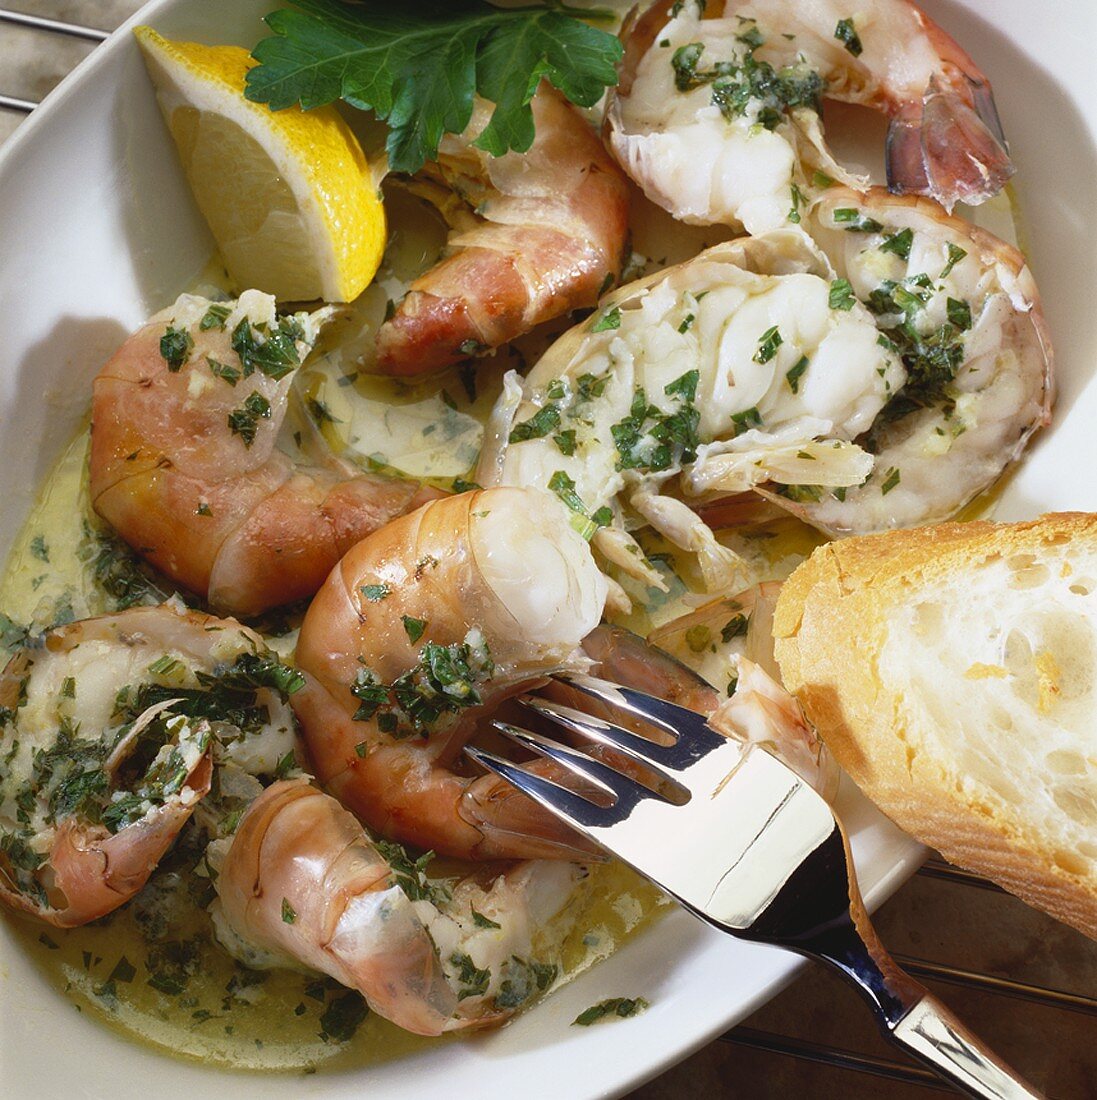 Gamberi alla trapanese (Prawns with herbs and garlic oil)